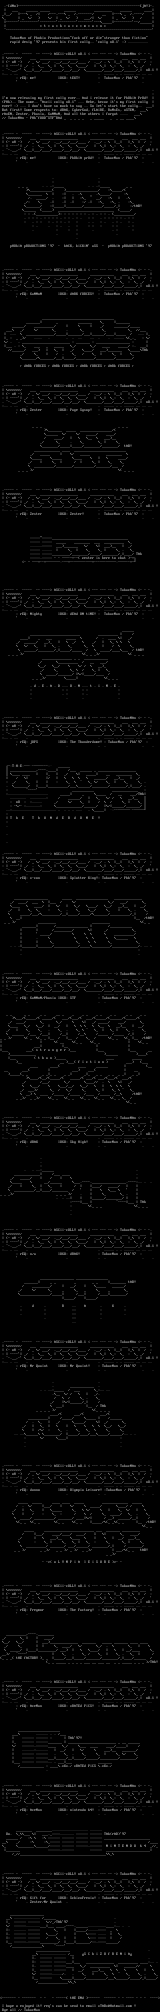 ascii colly no.1 by tabacman